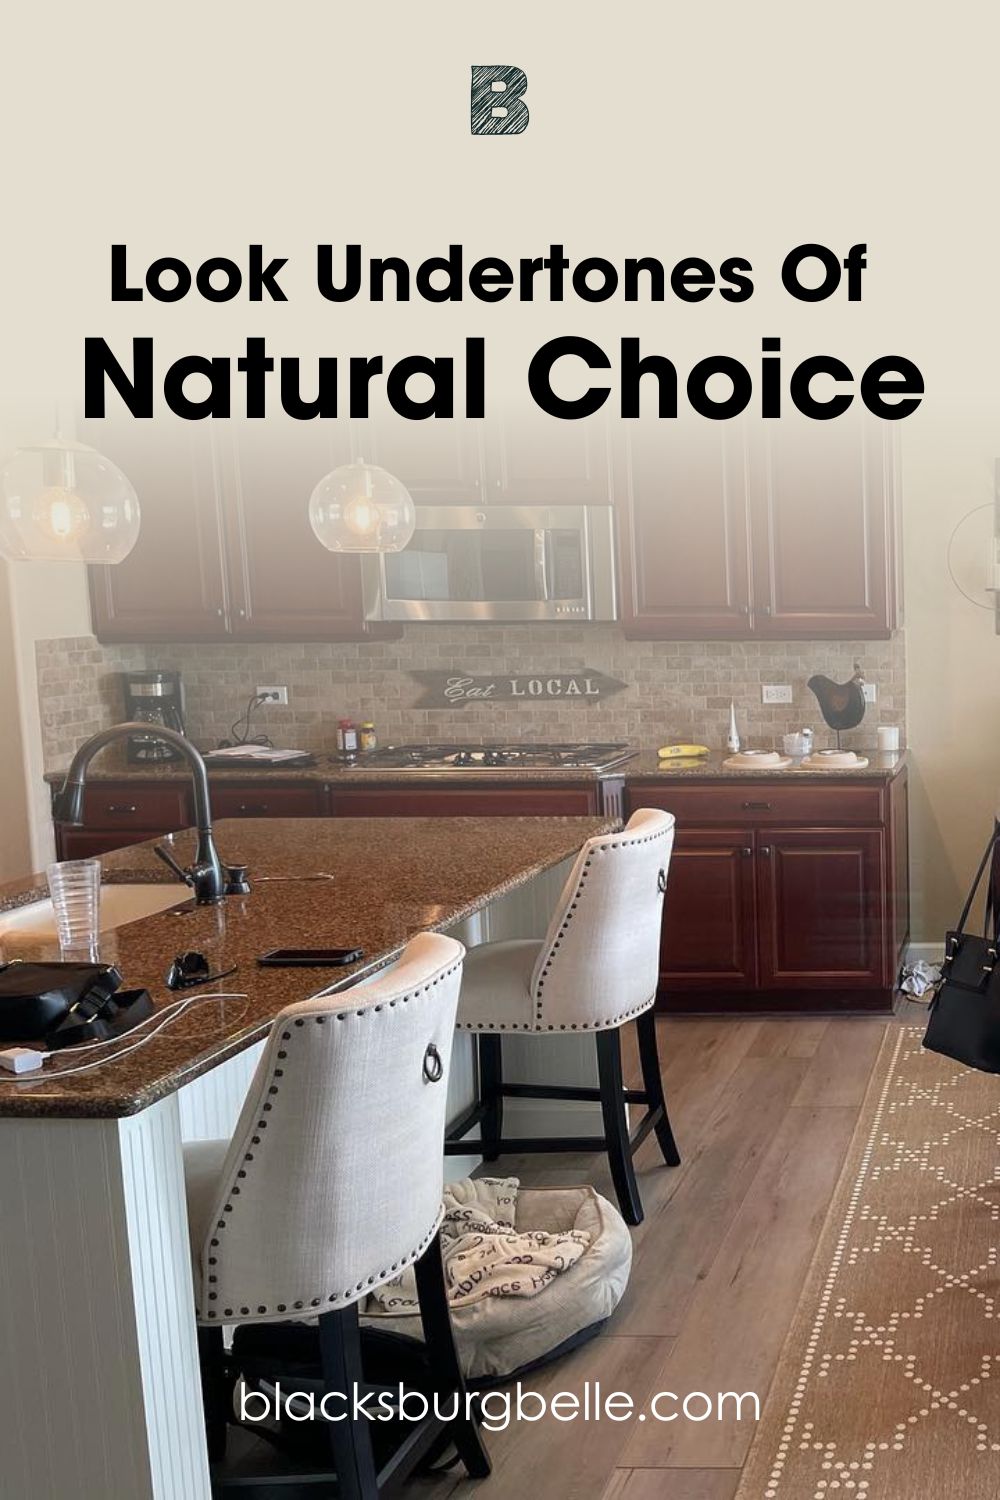 A Closer Look at the Undertones in Natural Choice